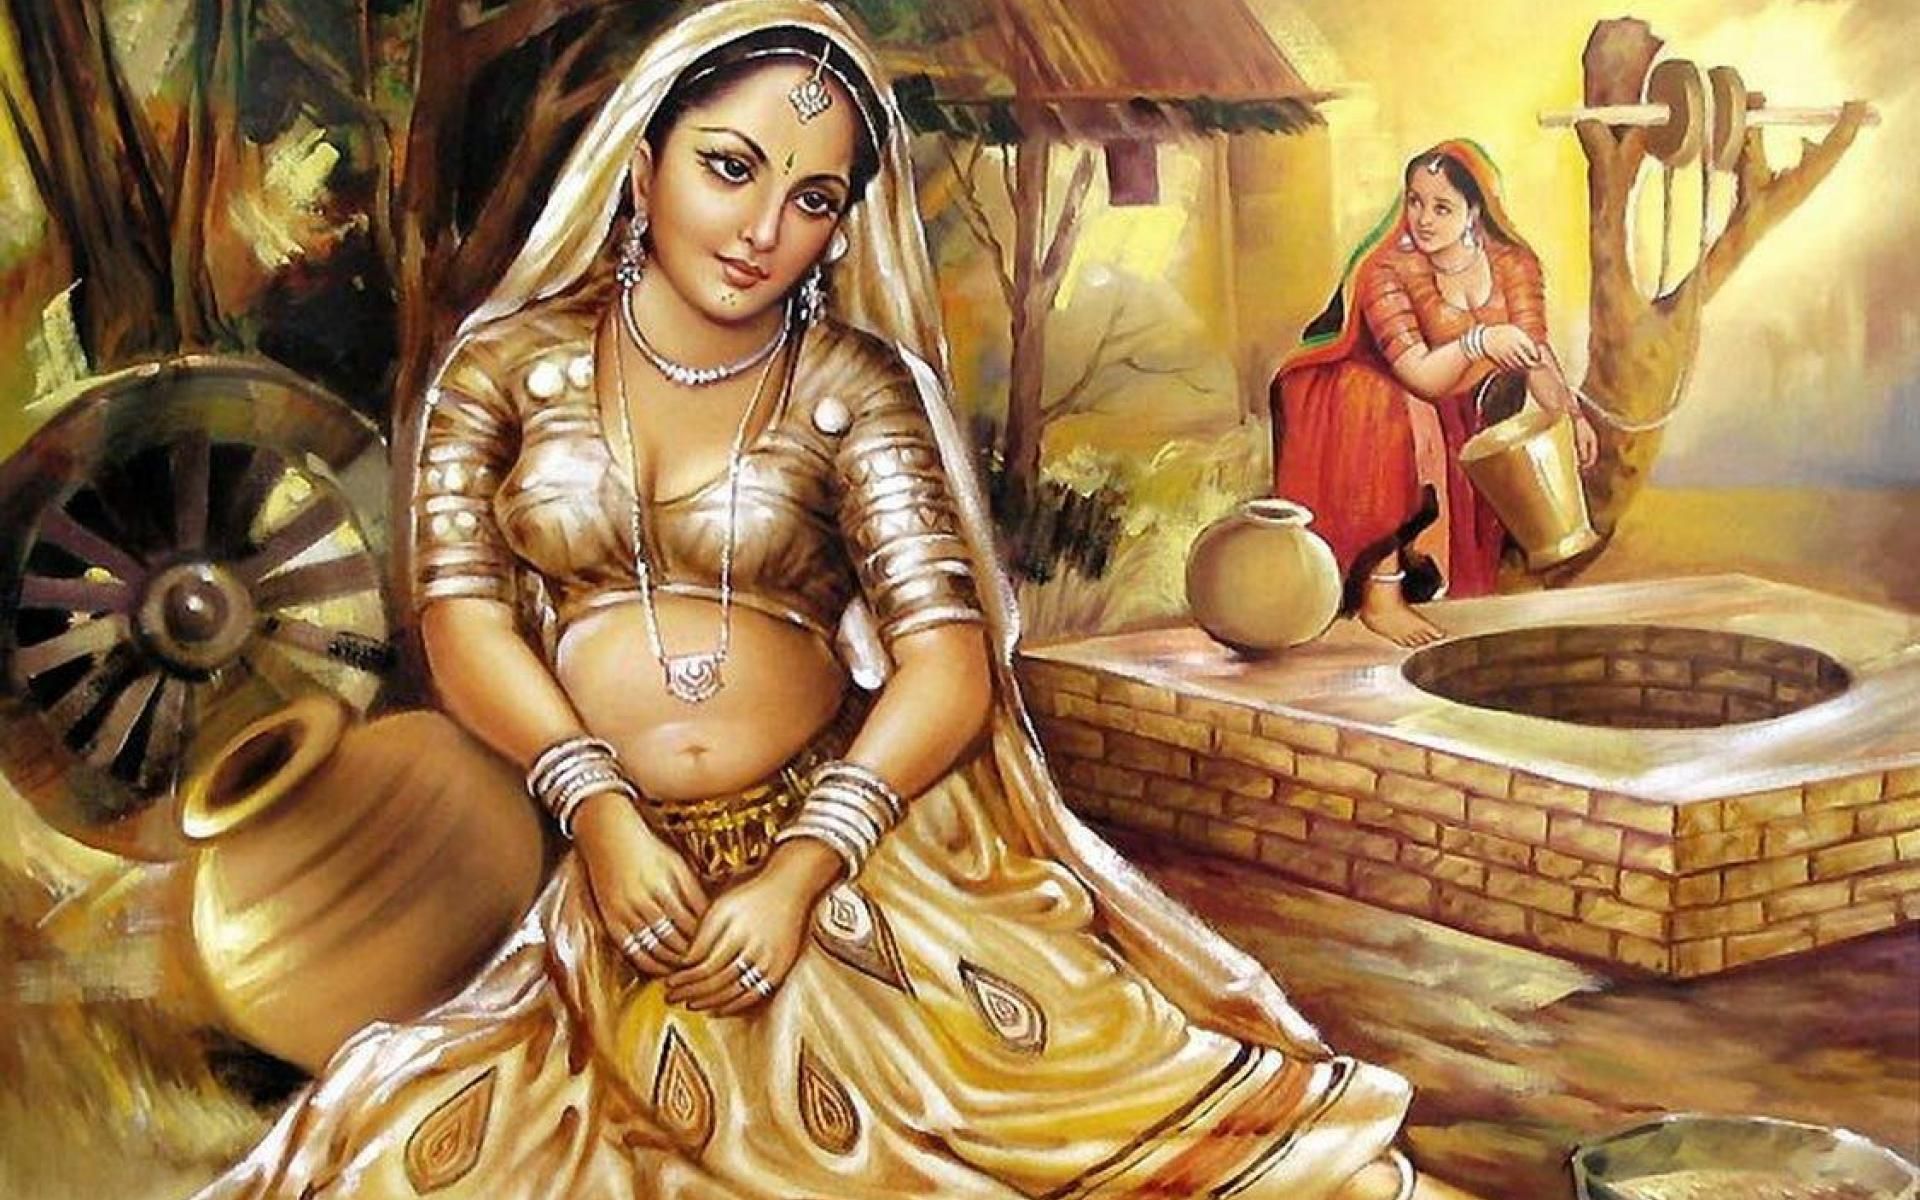 Woman Painting Of Indian Culture HD Wallpaper For Desktop. Painting of girl, Indian artist, Rajasthani painting